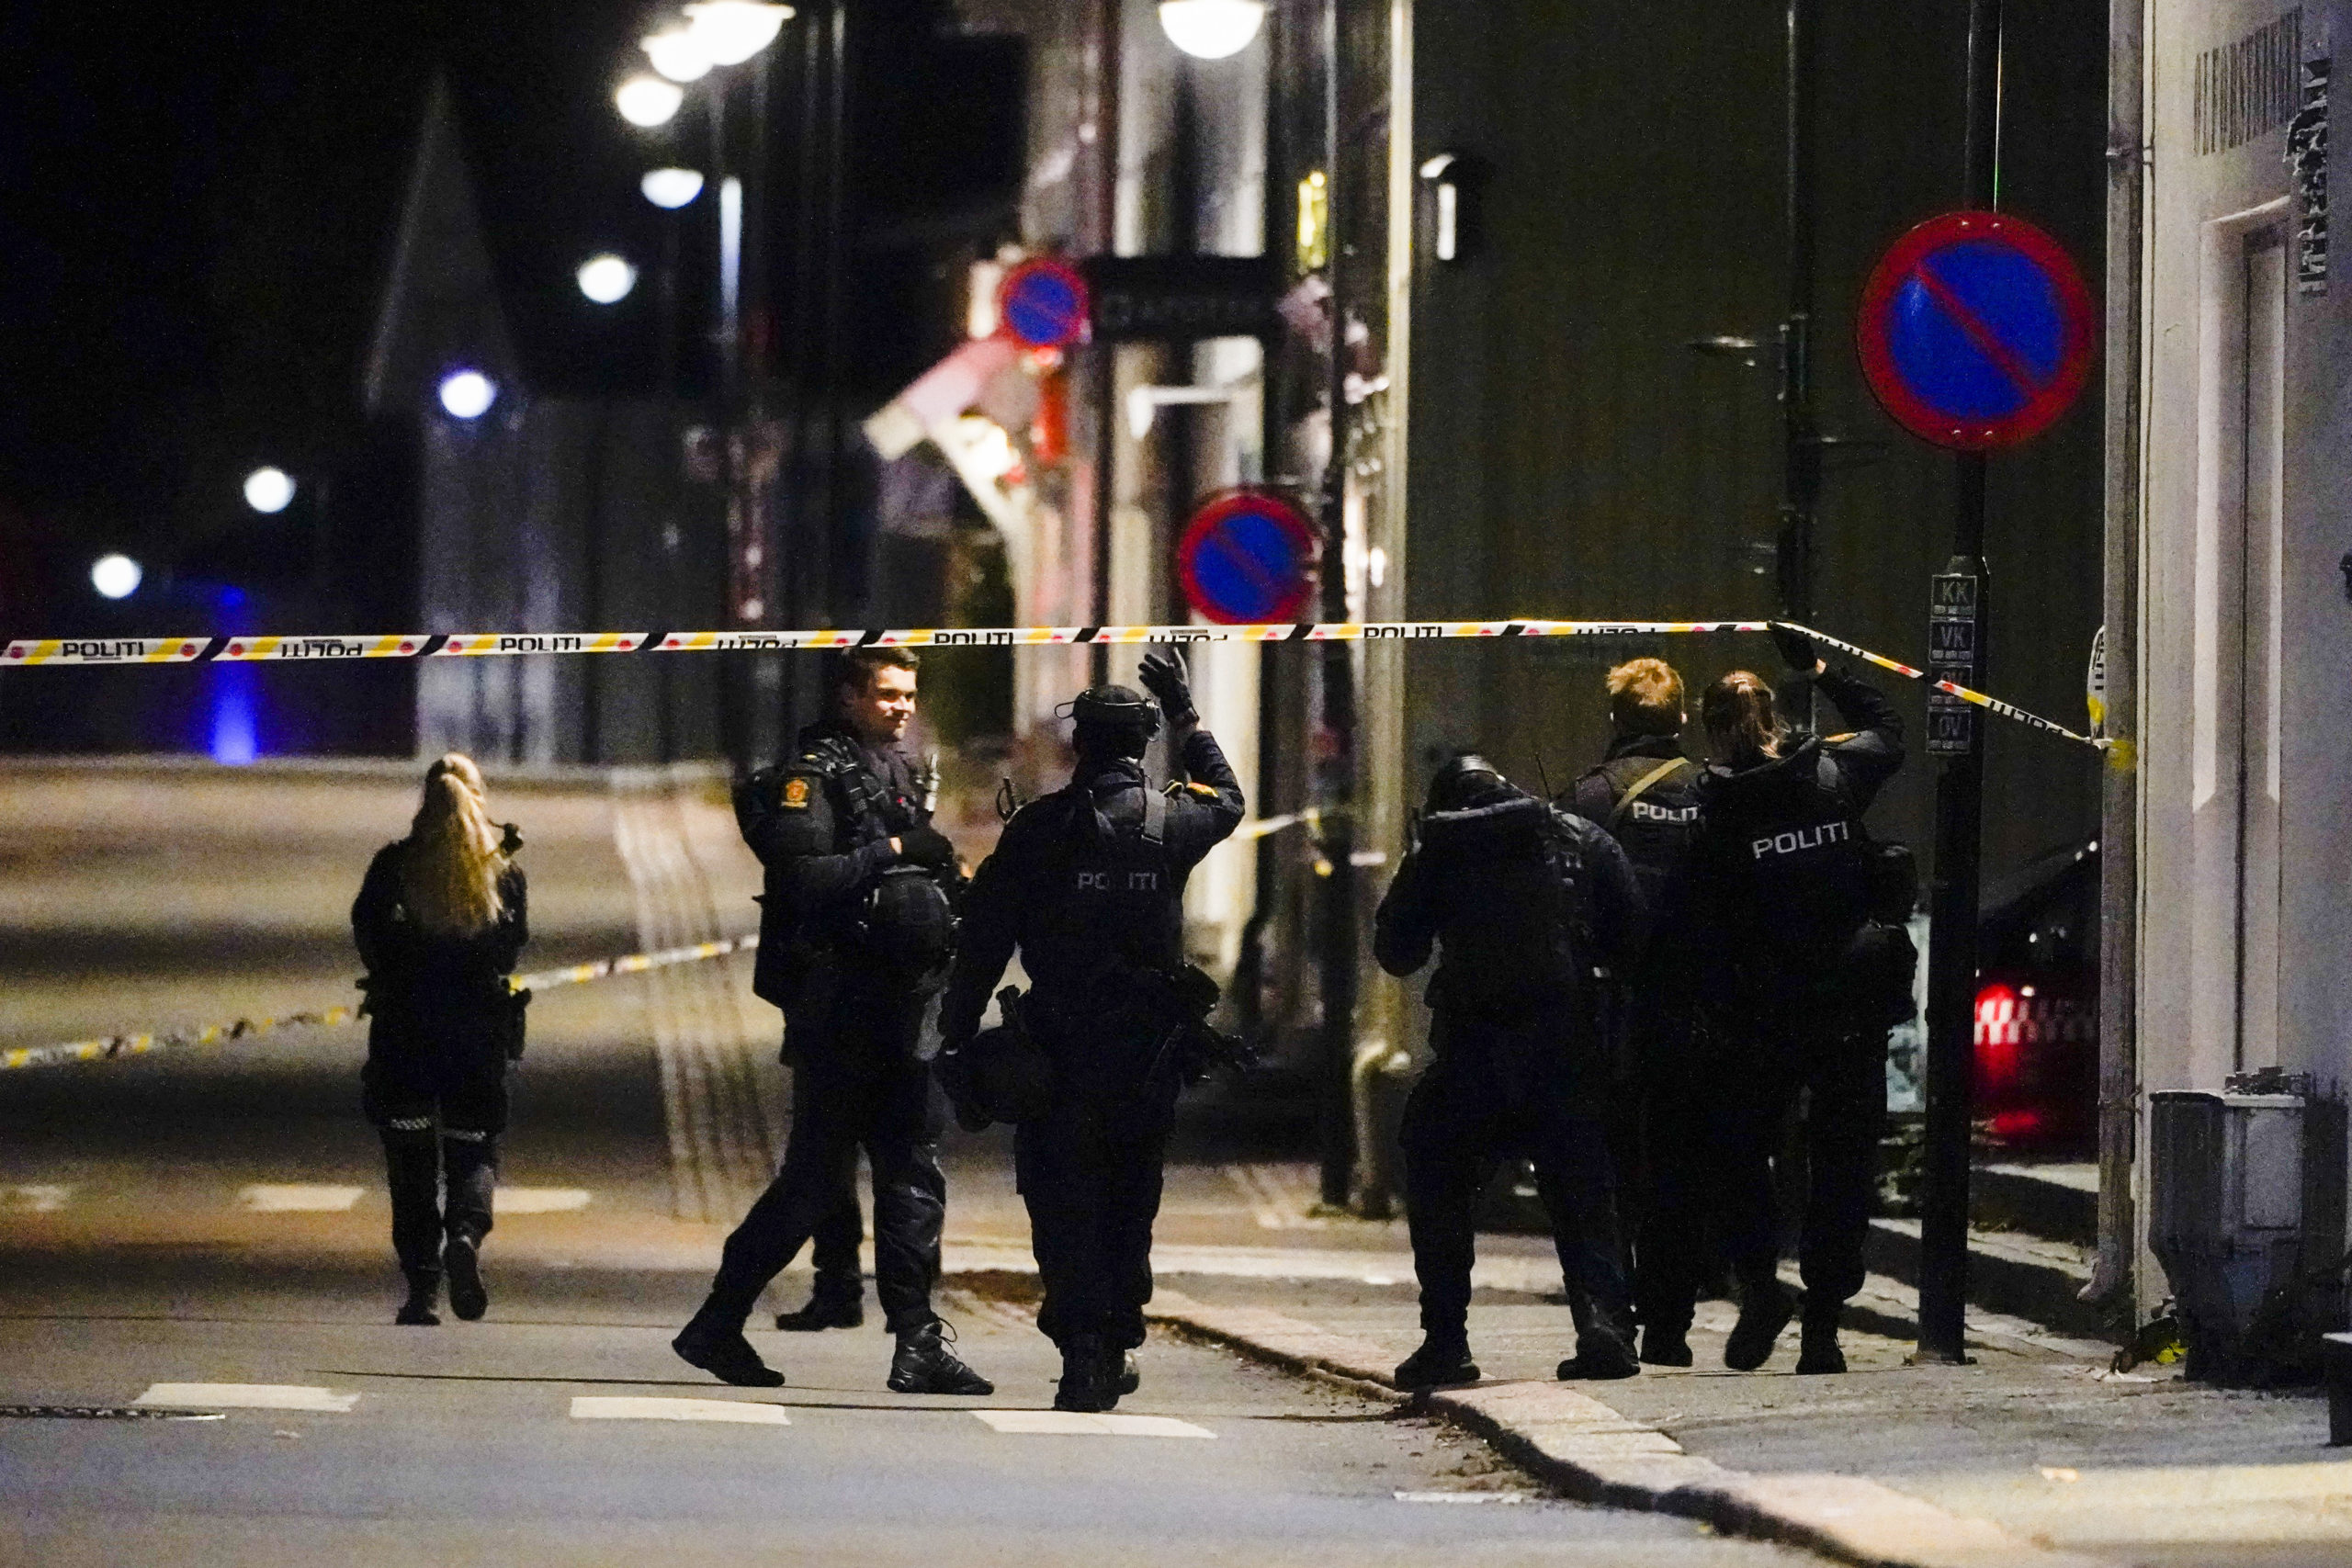 Police at the scene after an attack Wednesday in Konigsberg, Norway.